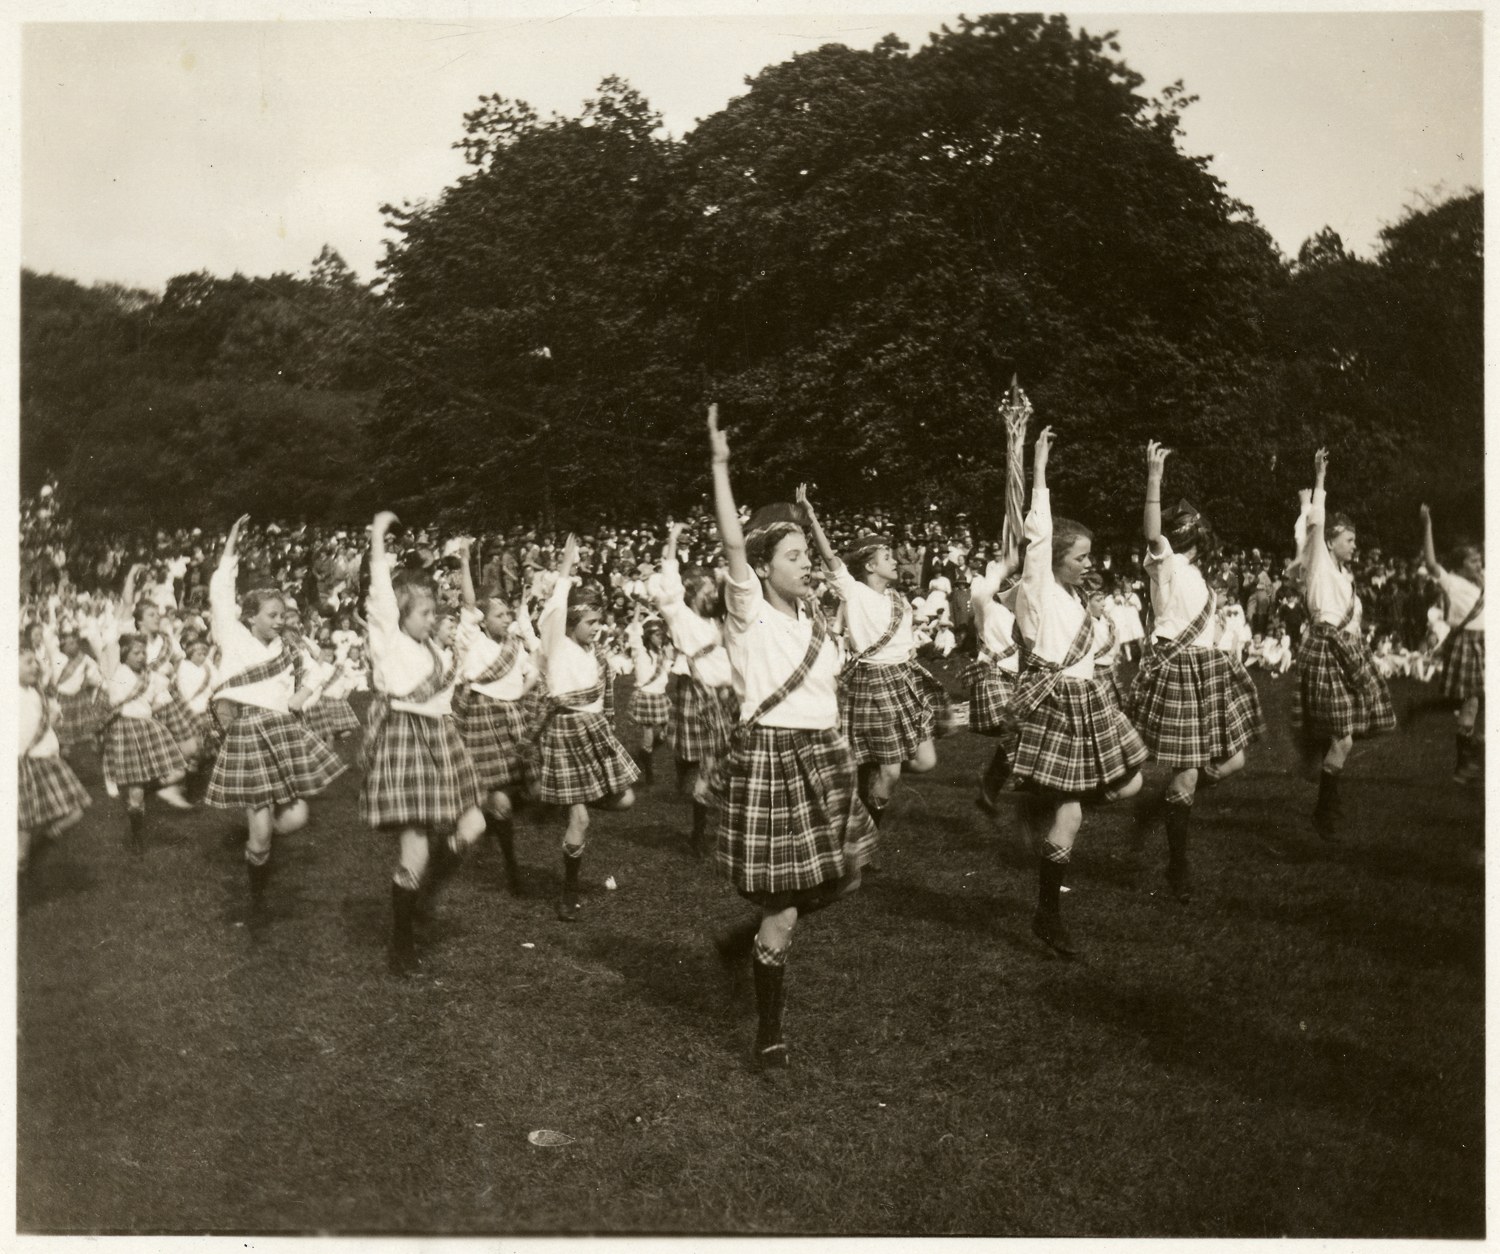 Felix J. Koch, Celtic Dance at May Day Celebration, May, 1921. Gelatin silver print, 4 x 5 inches. Courtesy of Cincinnati Museum Center History Library and Archives